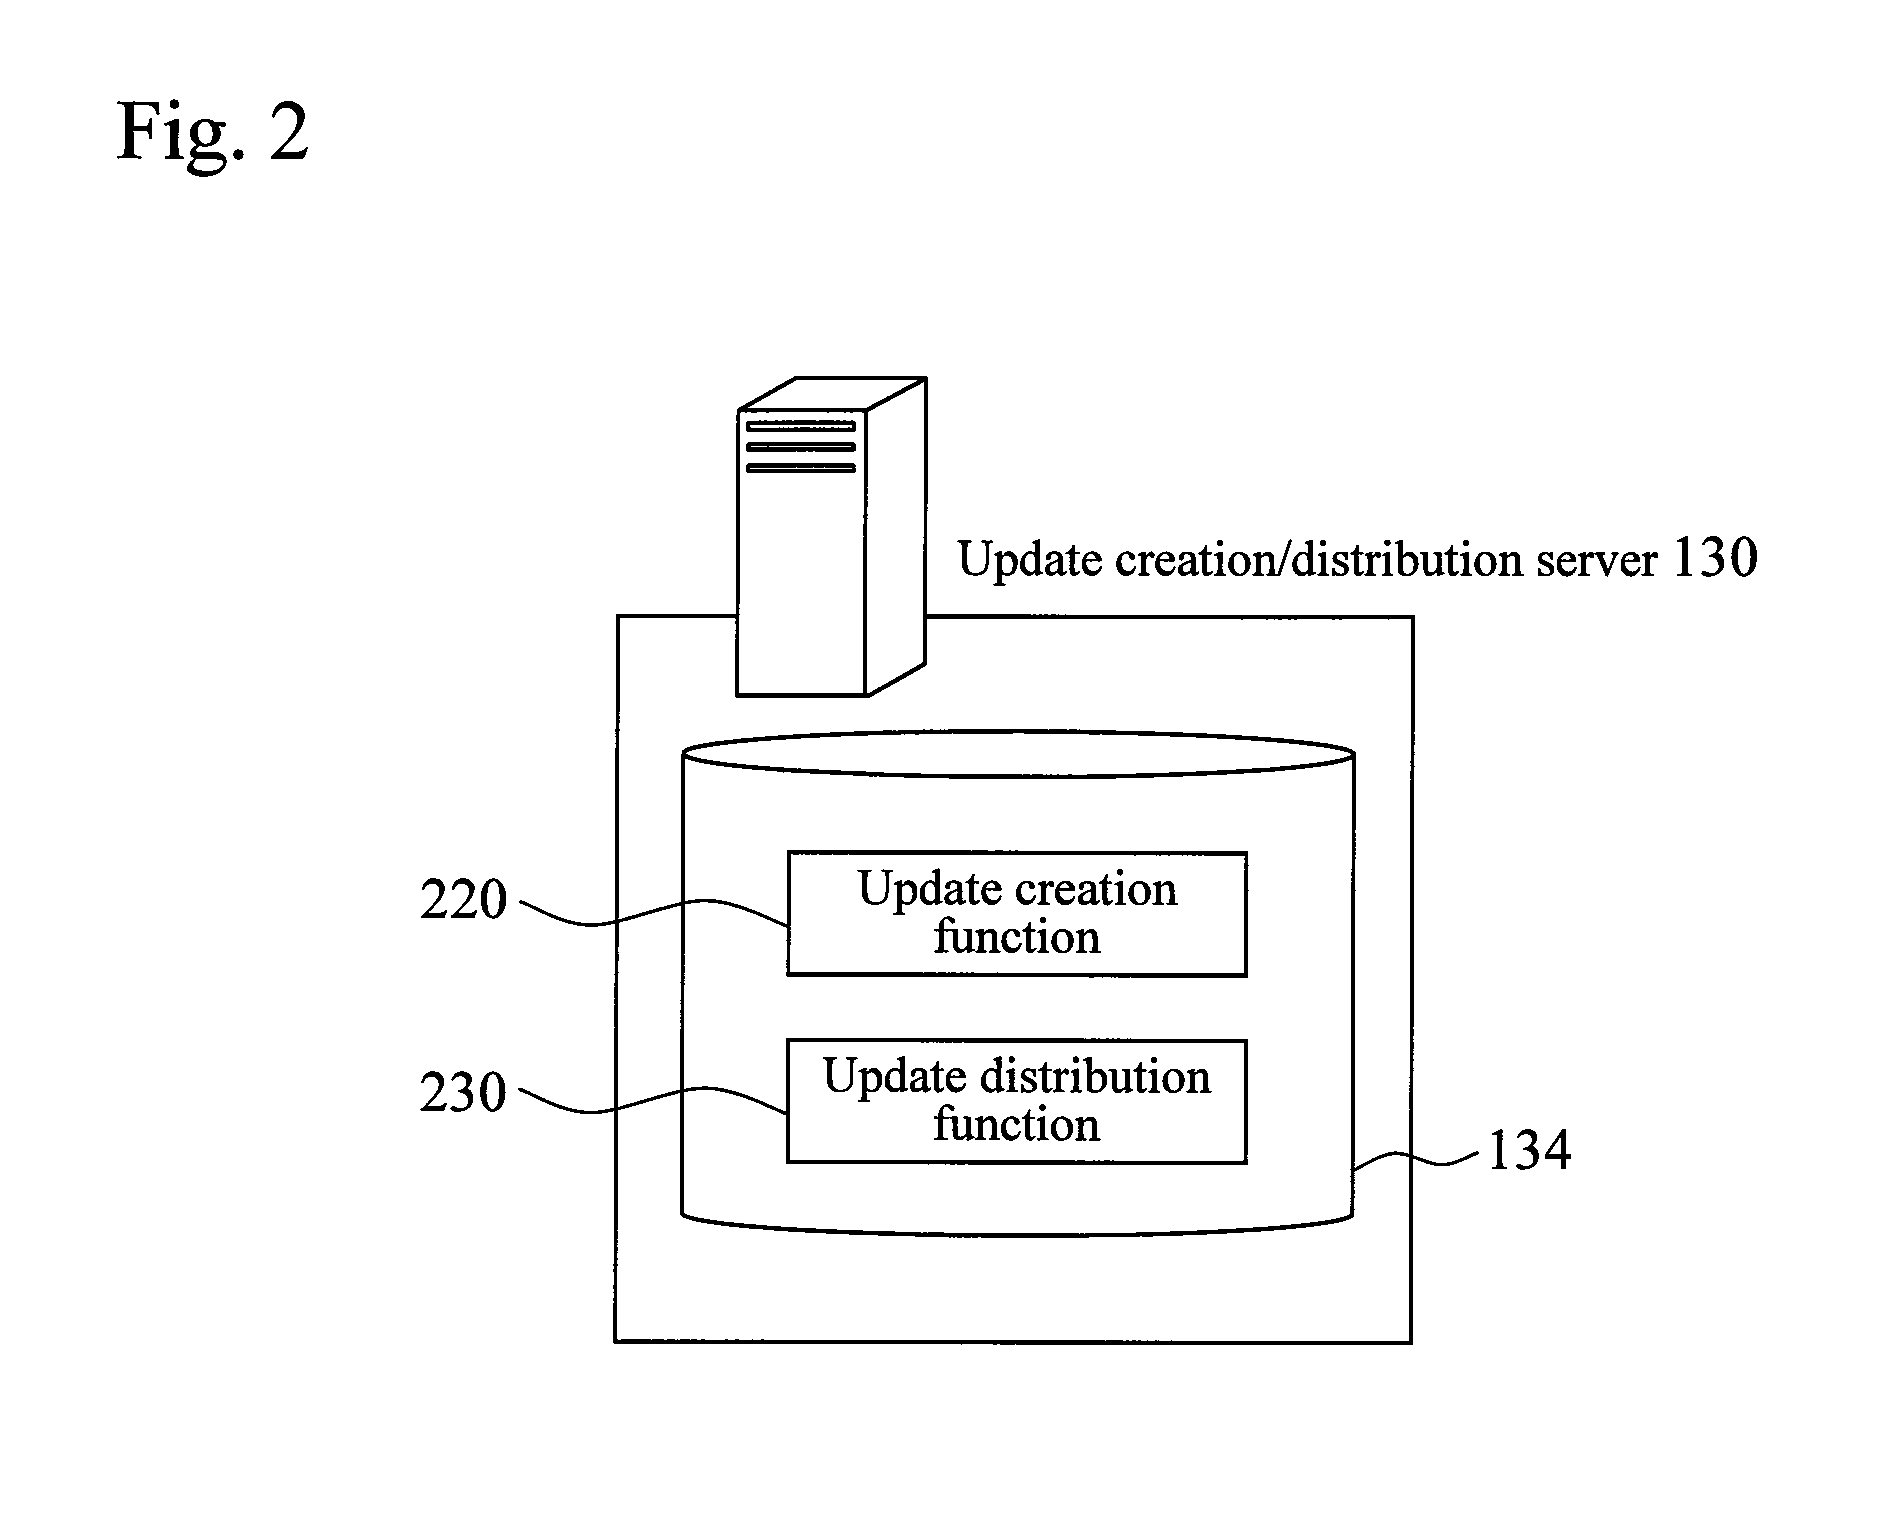 Firmware update data generating apparatus and information device